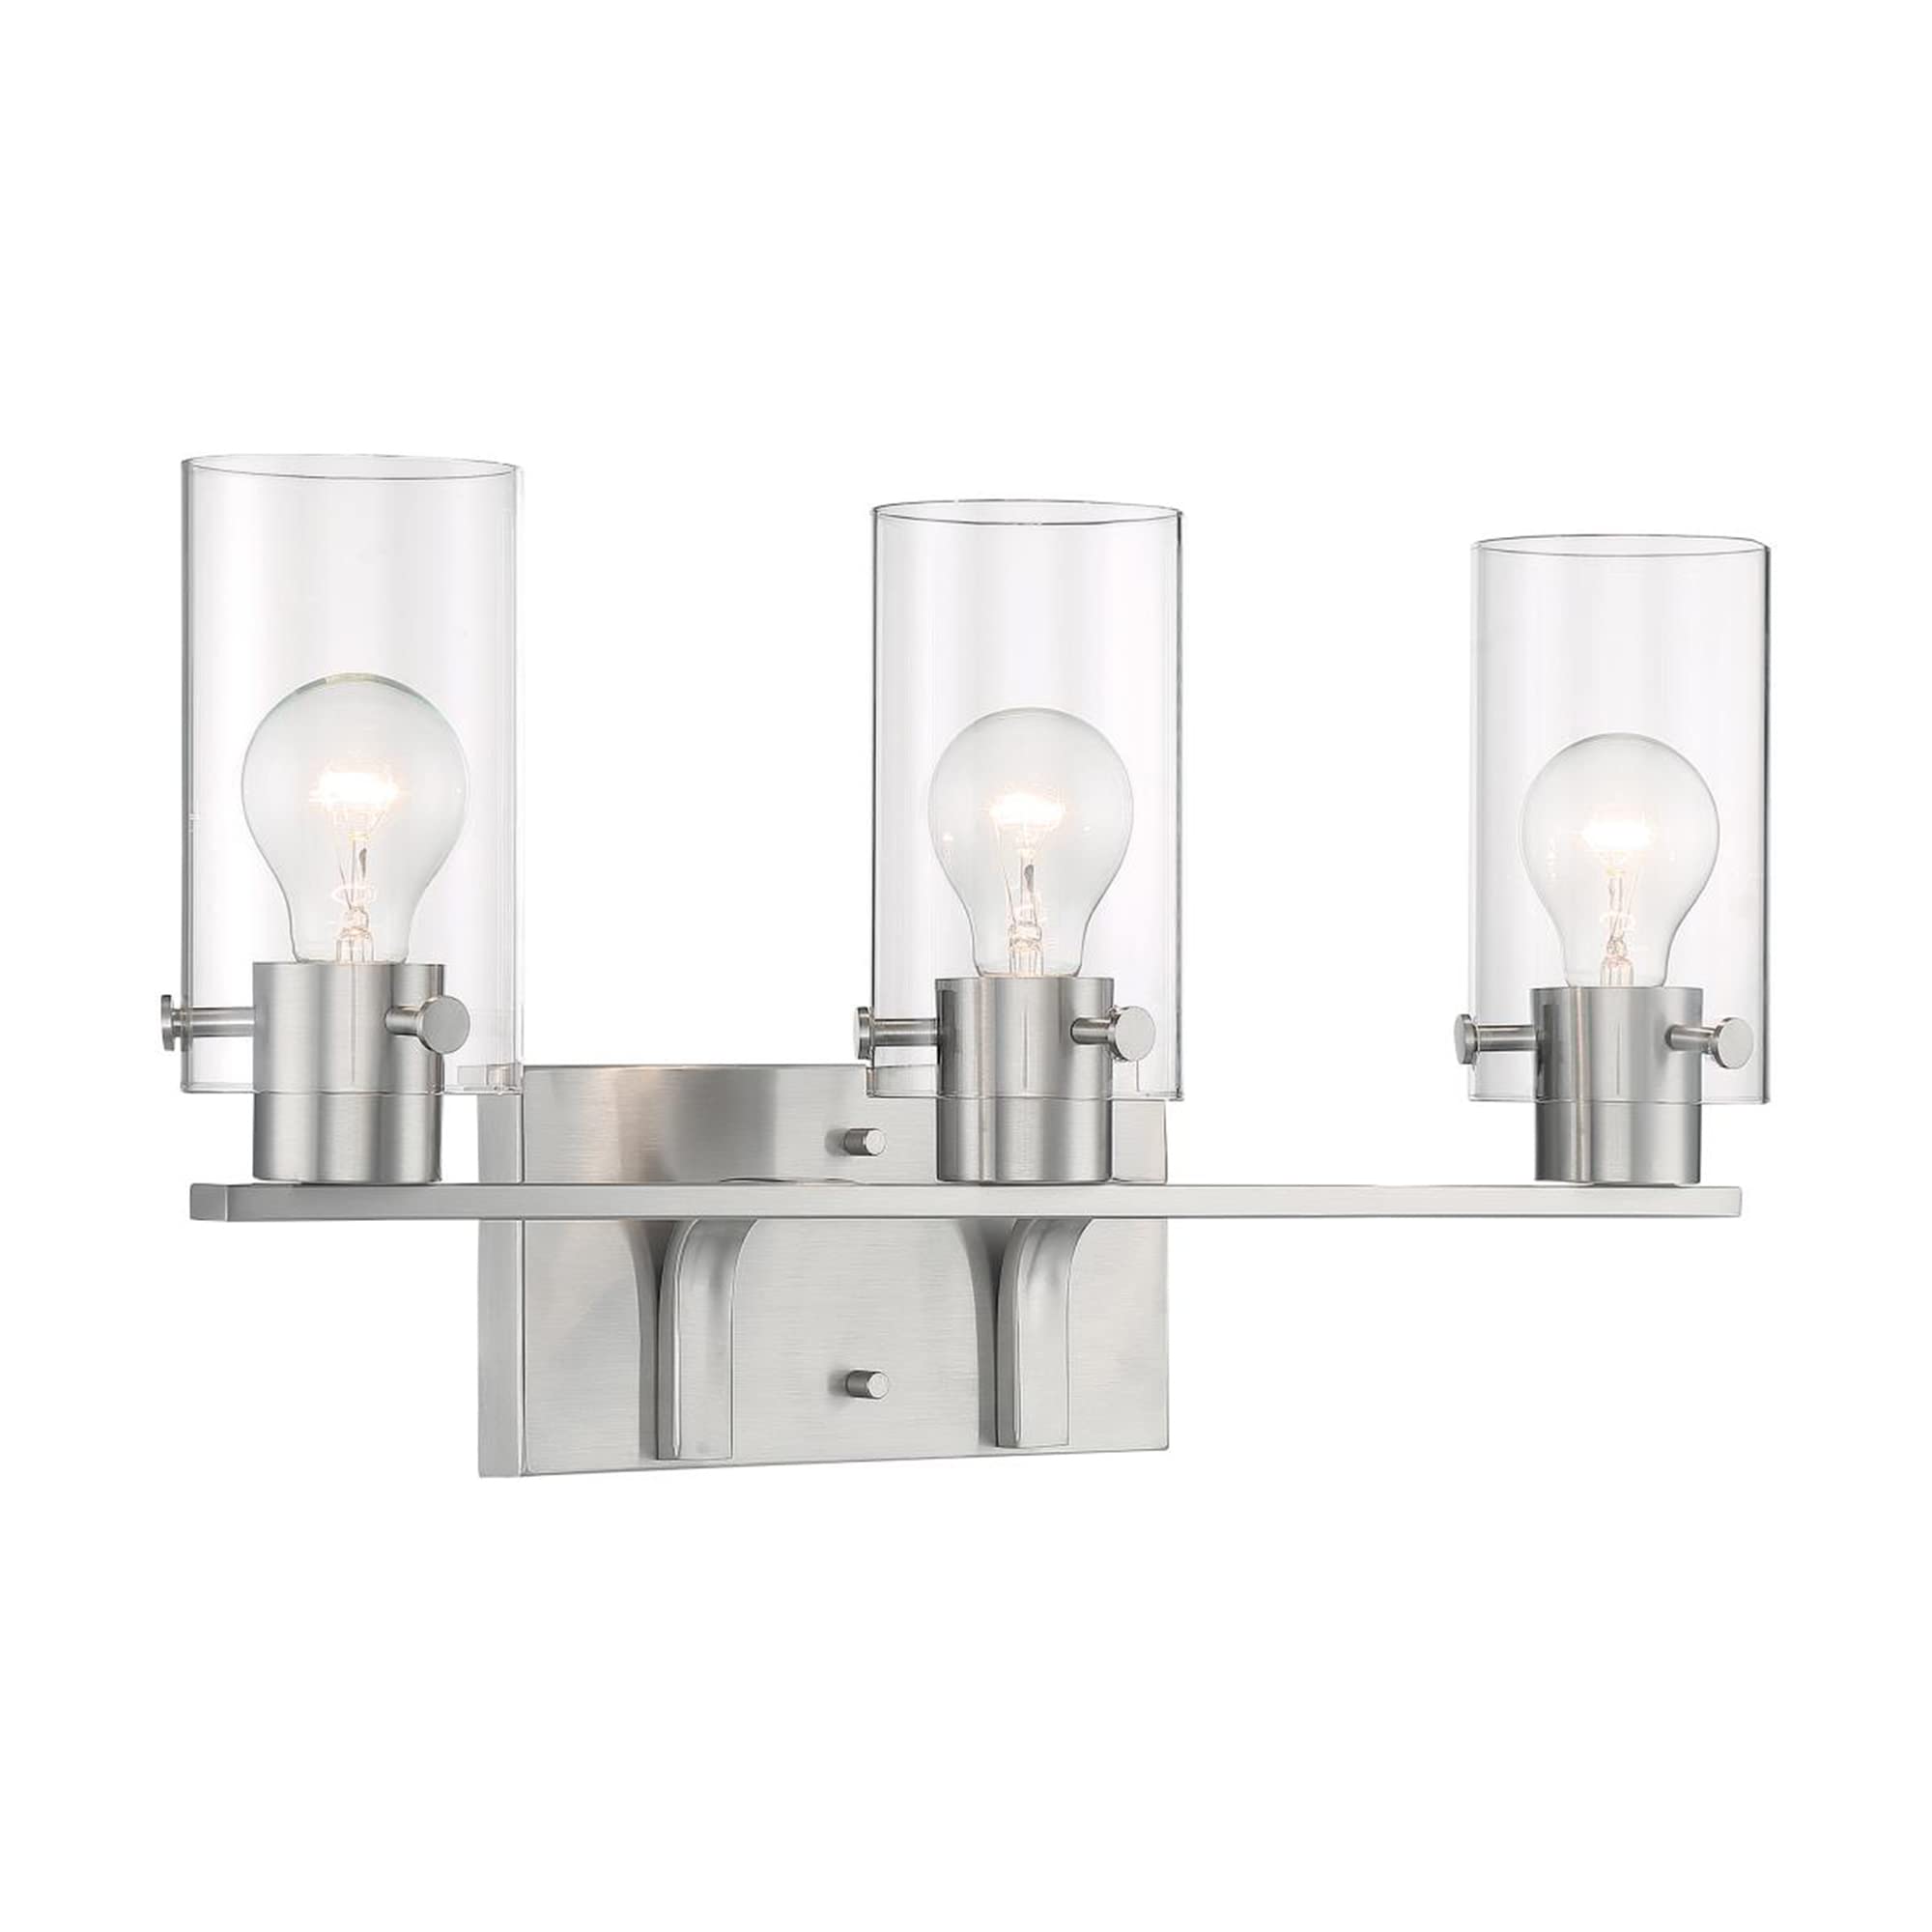 Ciata Lighting 3 Light Vanity Light Fixture with Clear Cylinder Glass Shade, Bathroom Wall Sconce Lighting 3 Light Over Mirror, Up/Down Installation, Metal Wall Mounted Lamp  - Like New